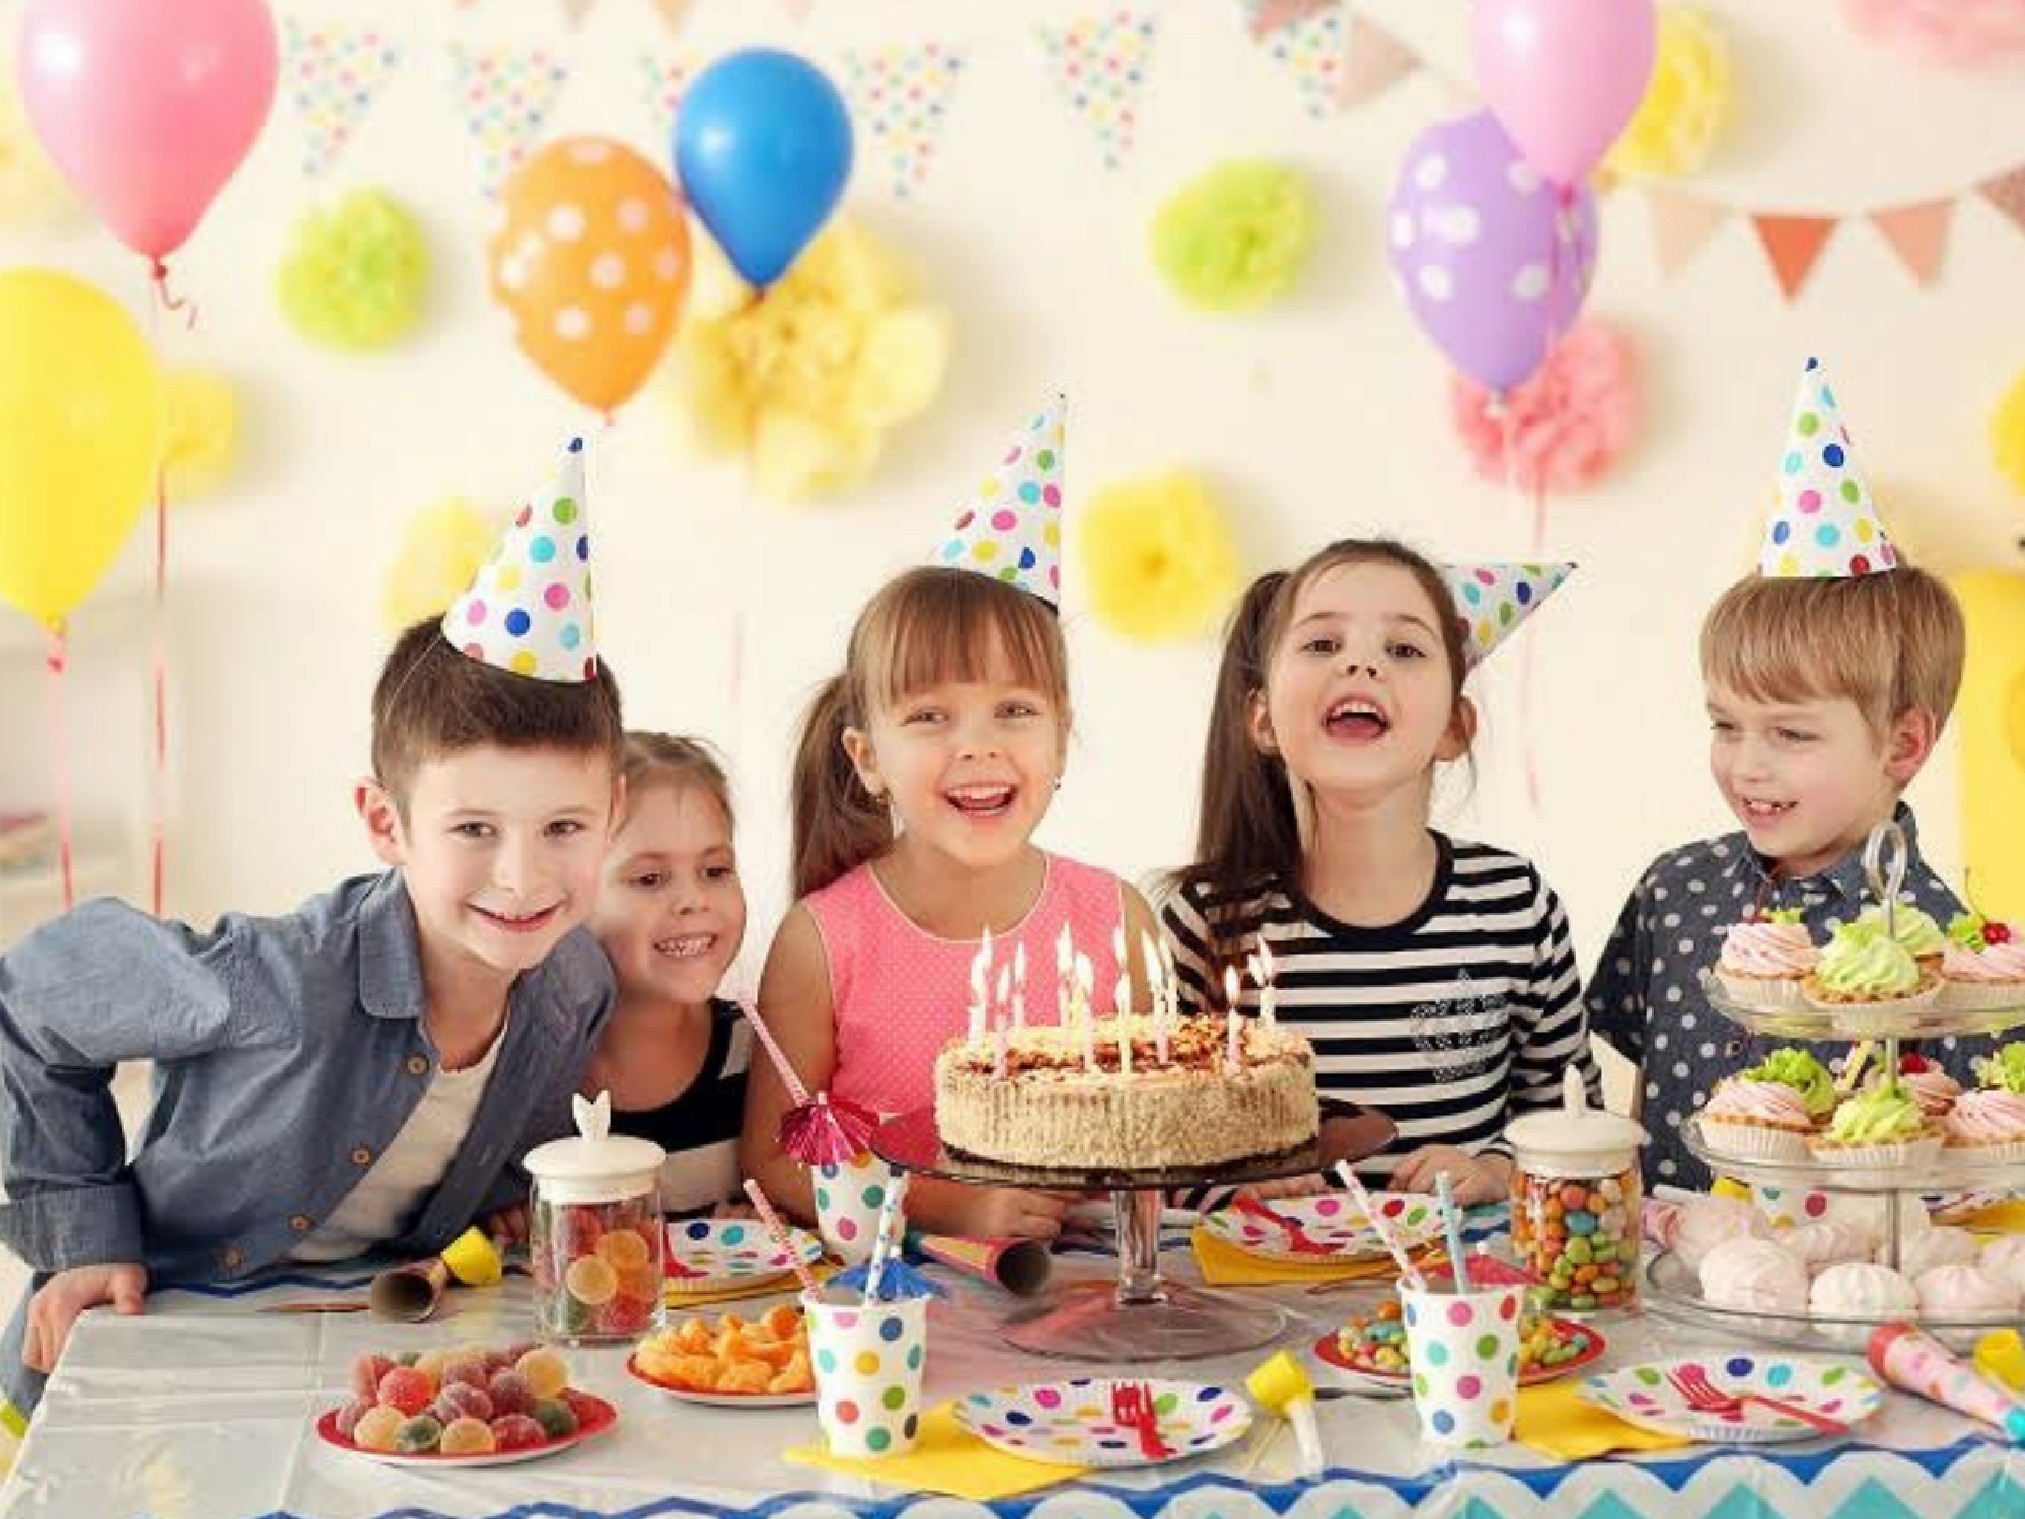 Family Birthday Party Ideas
 How to Throw a Memorable Birthday Party for Your Kid